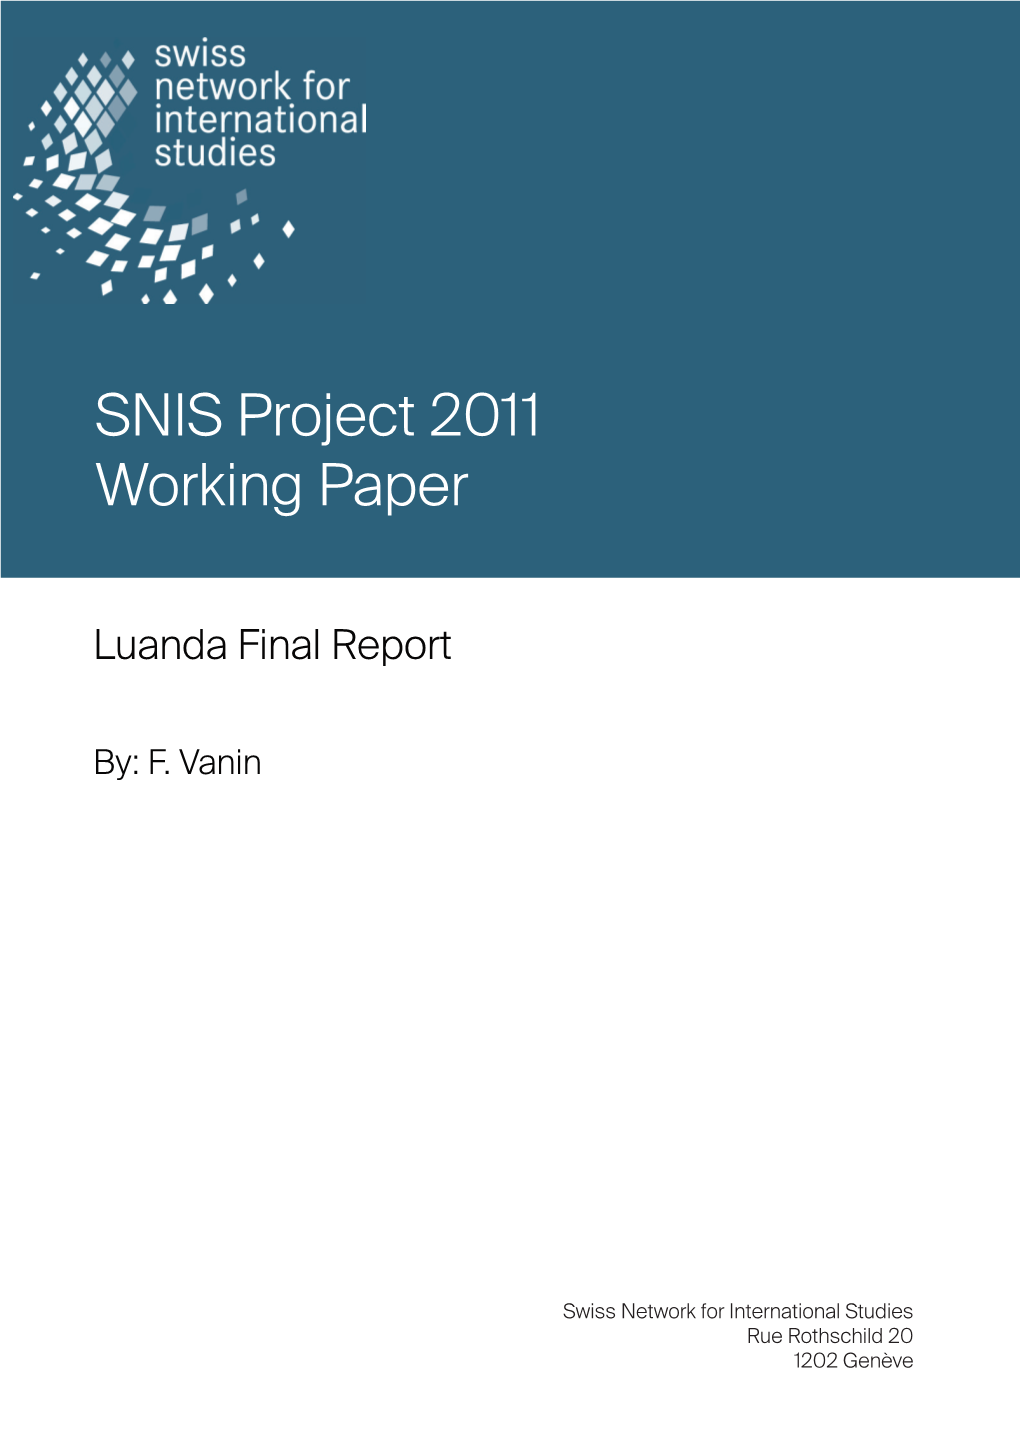 SNIS Project 2011 Working Paper